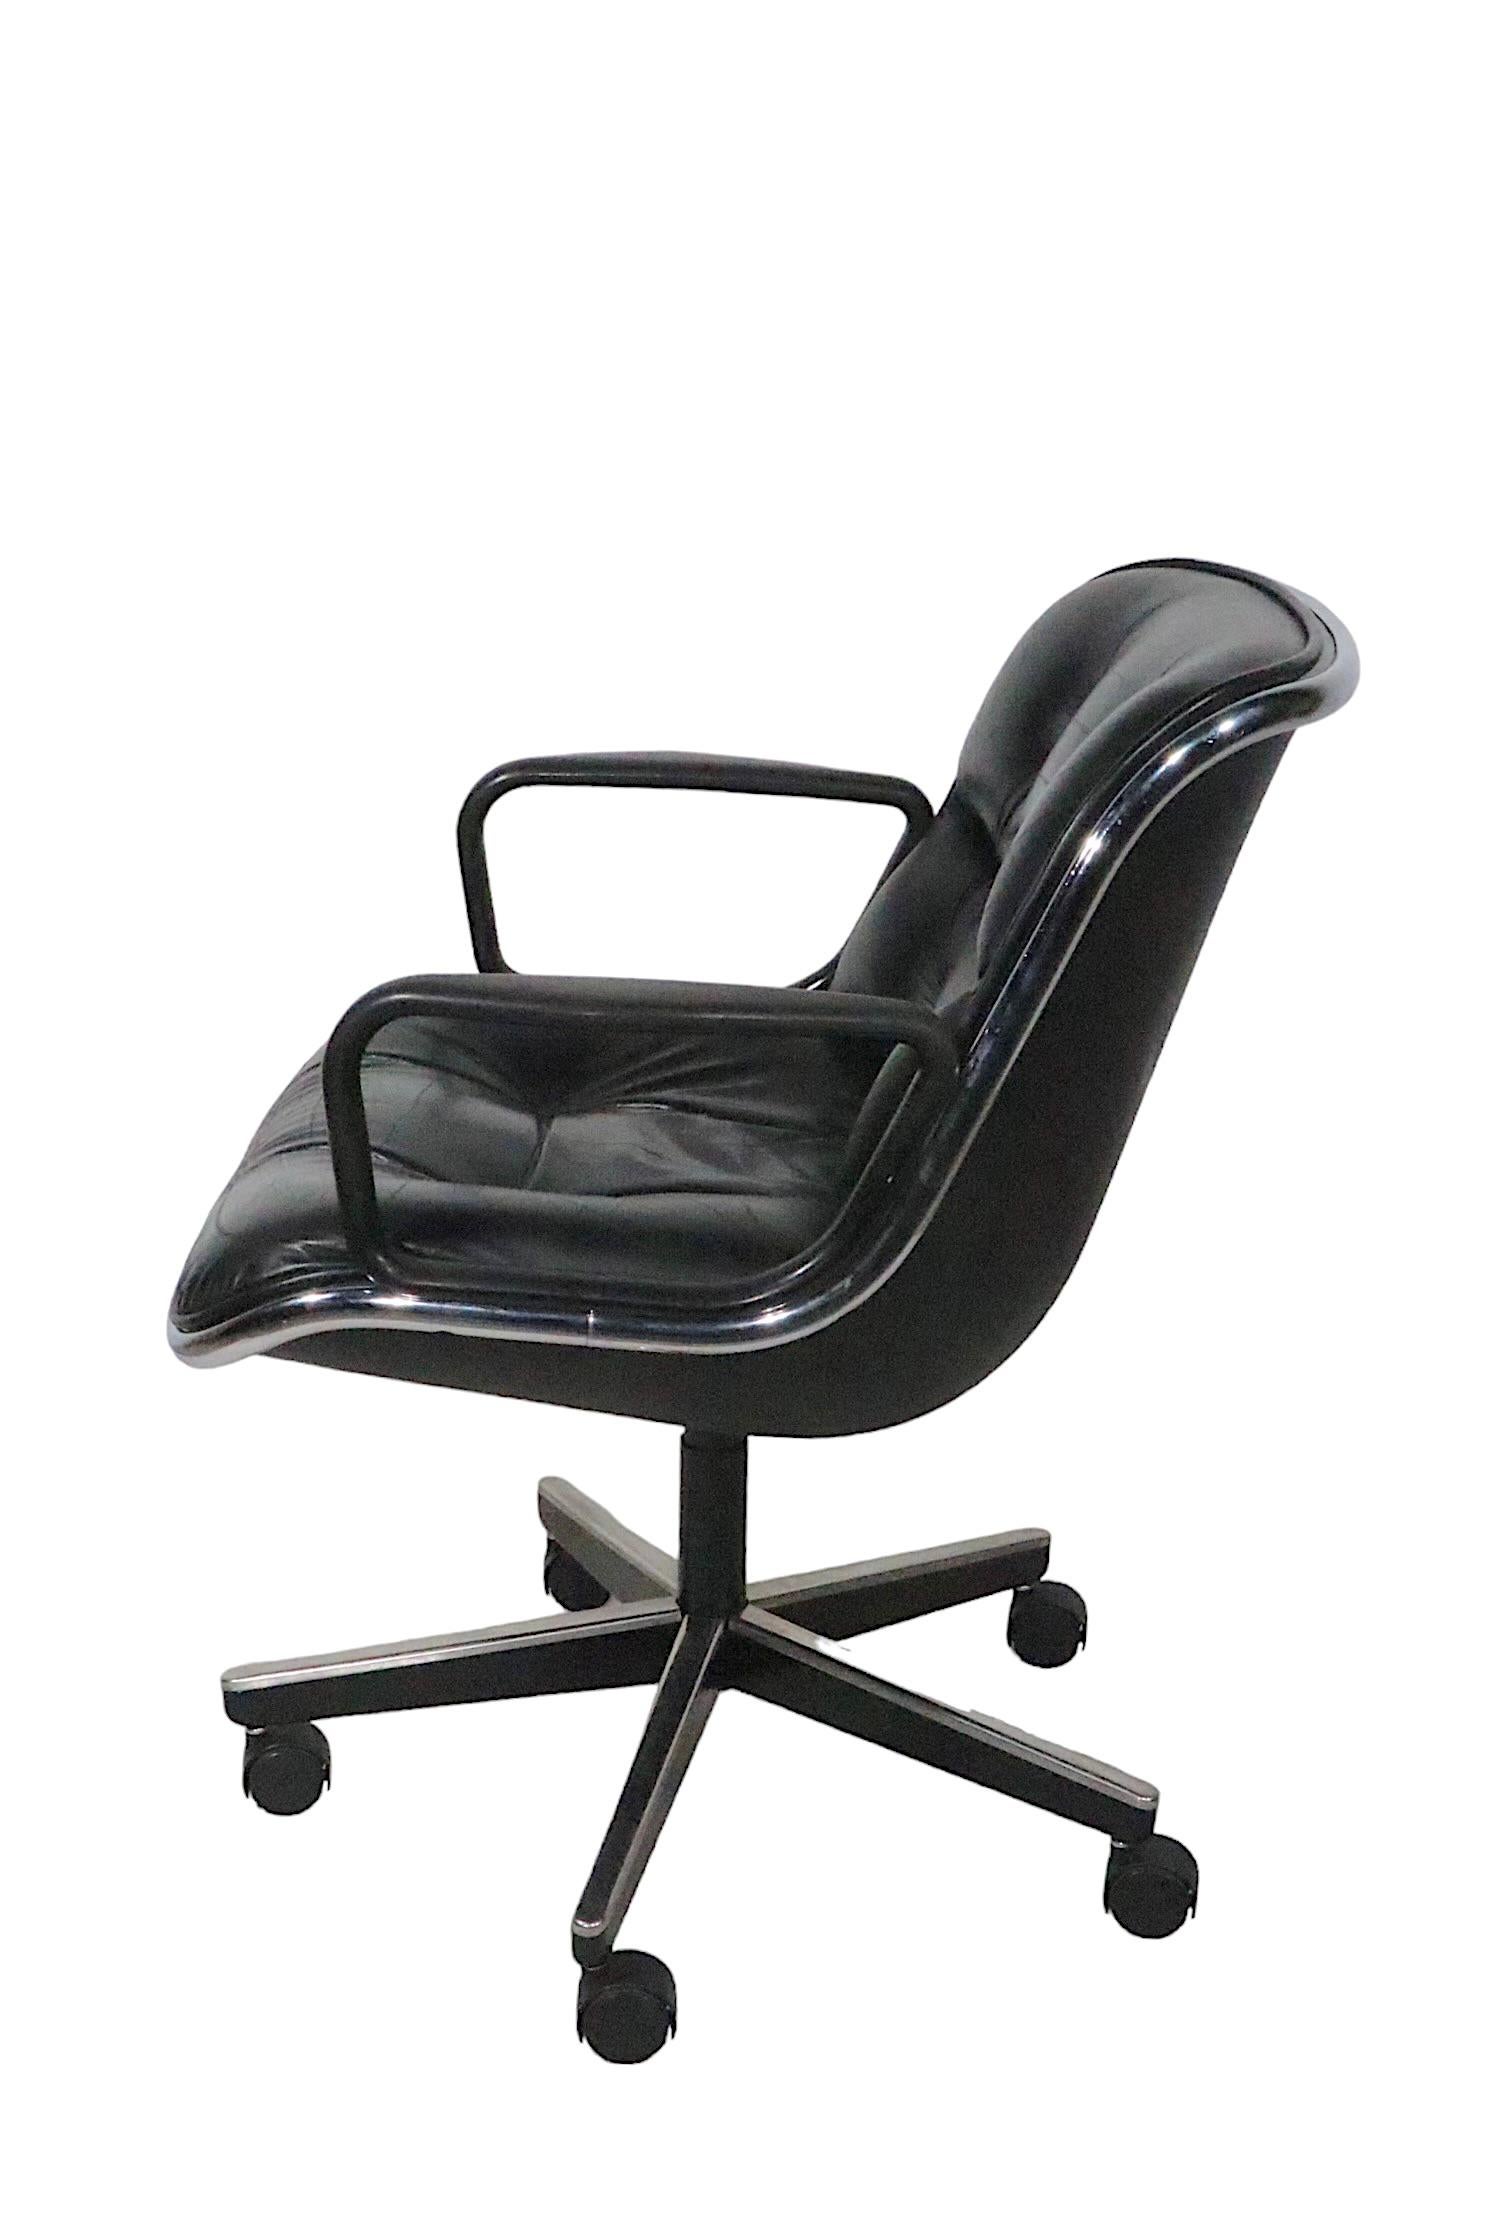 5 Knoll Swivel Tilt Office Chairs Designed by Charles Pollock for Knoll c 1960's For Sale 12